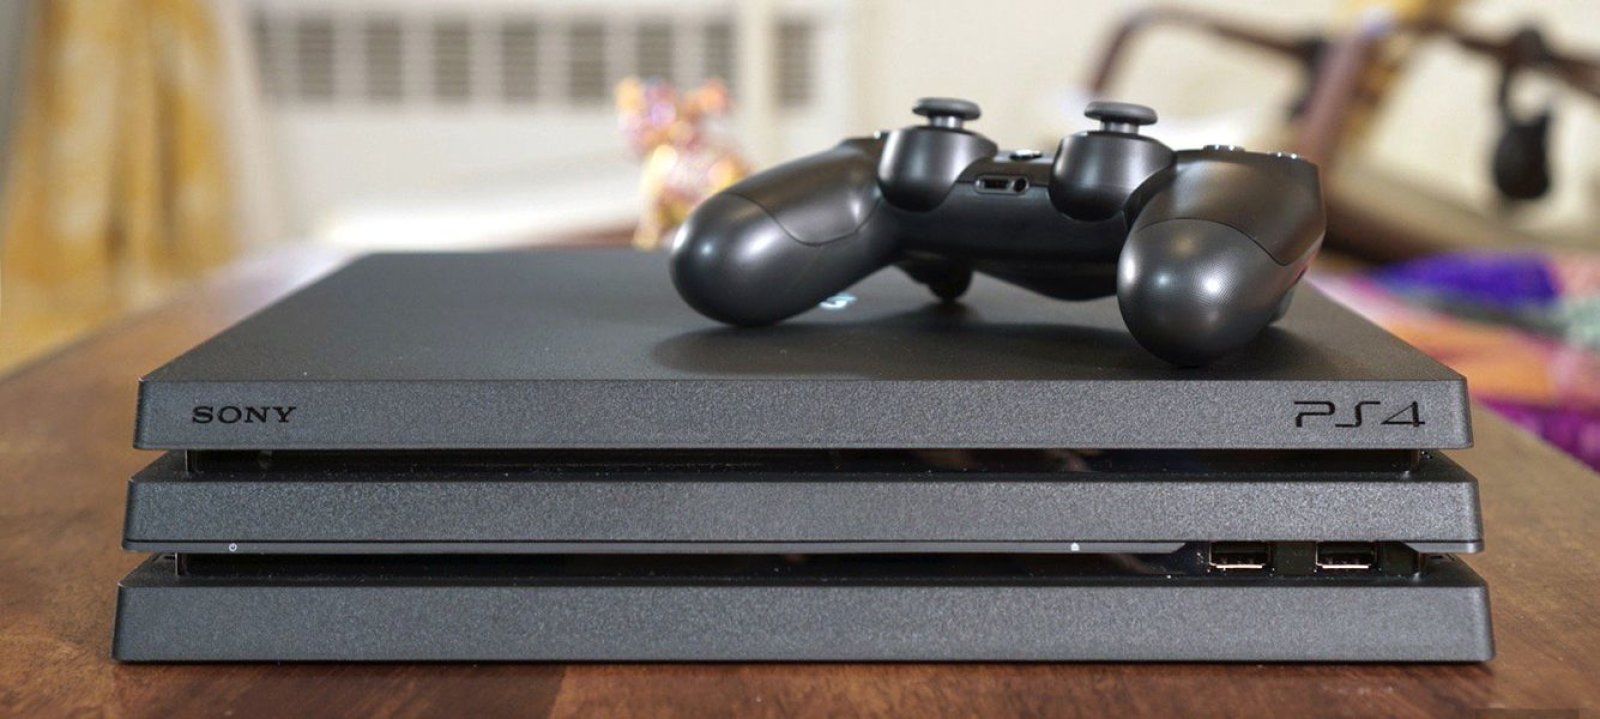 PS4 Pro is about to make games look much better on older TVs